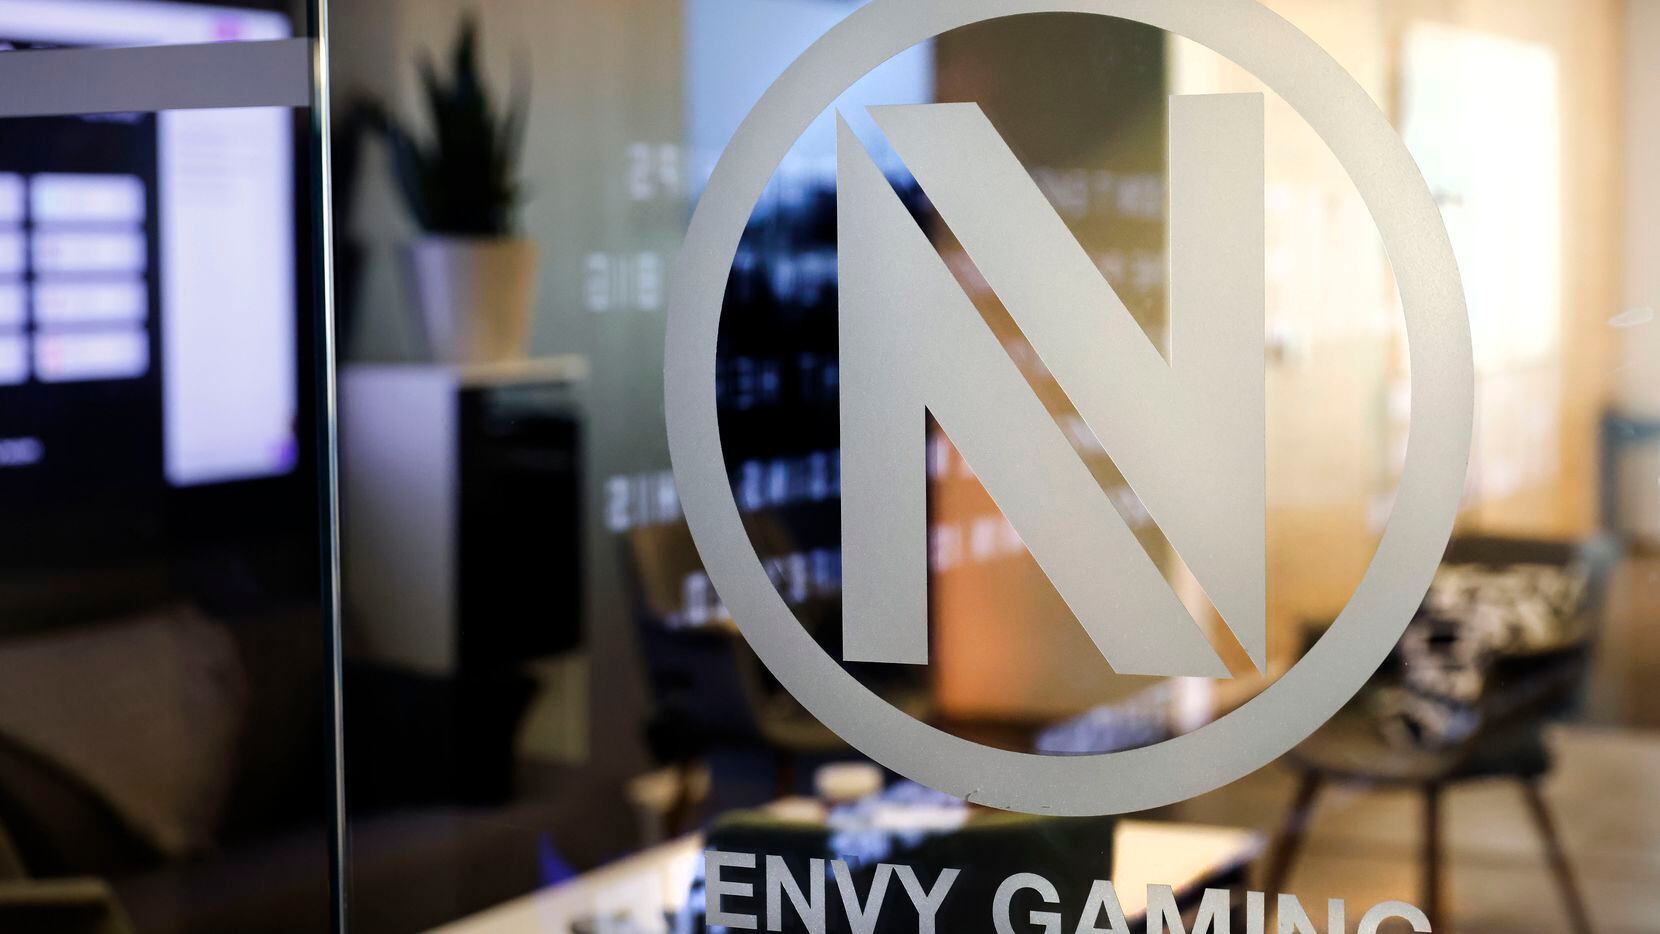 Envy Gaming is the owner and operator of global esports franchise Team Envy, the Dallas Fuel team in the Overwatch League, the Dallas Empire team in the Call of Duty League. Their headquarters are in Dallas' Victory Plaza, Monday, March 29, 2021.